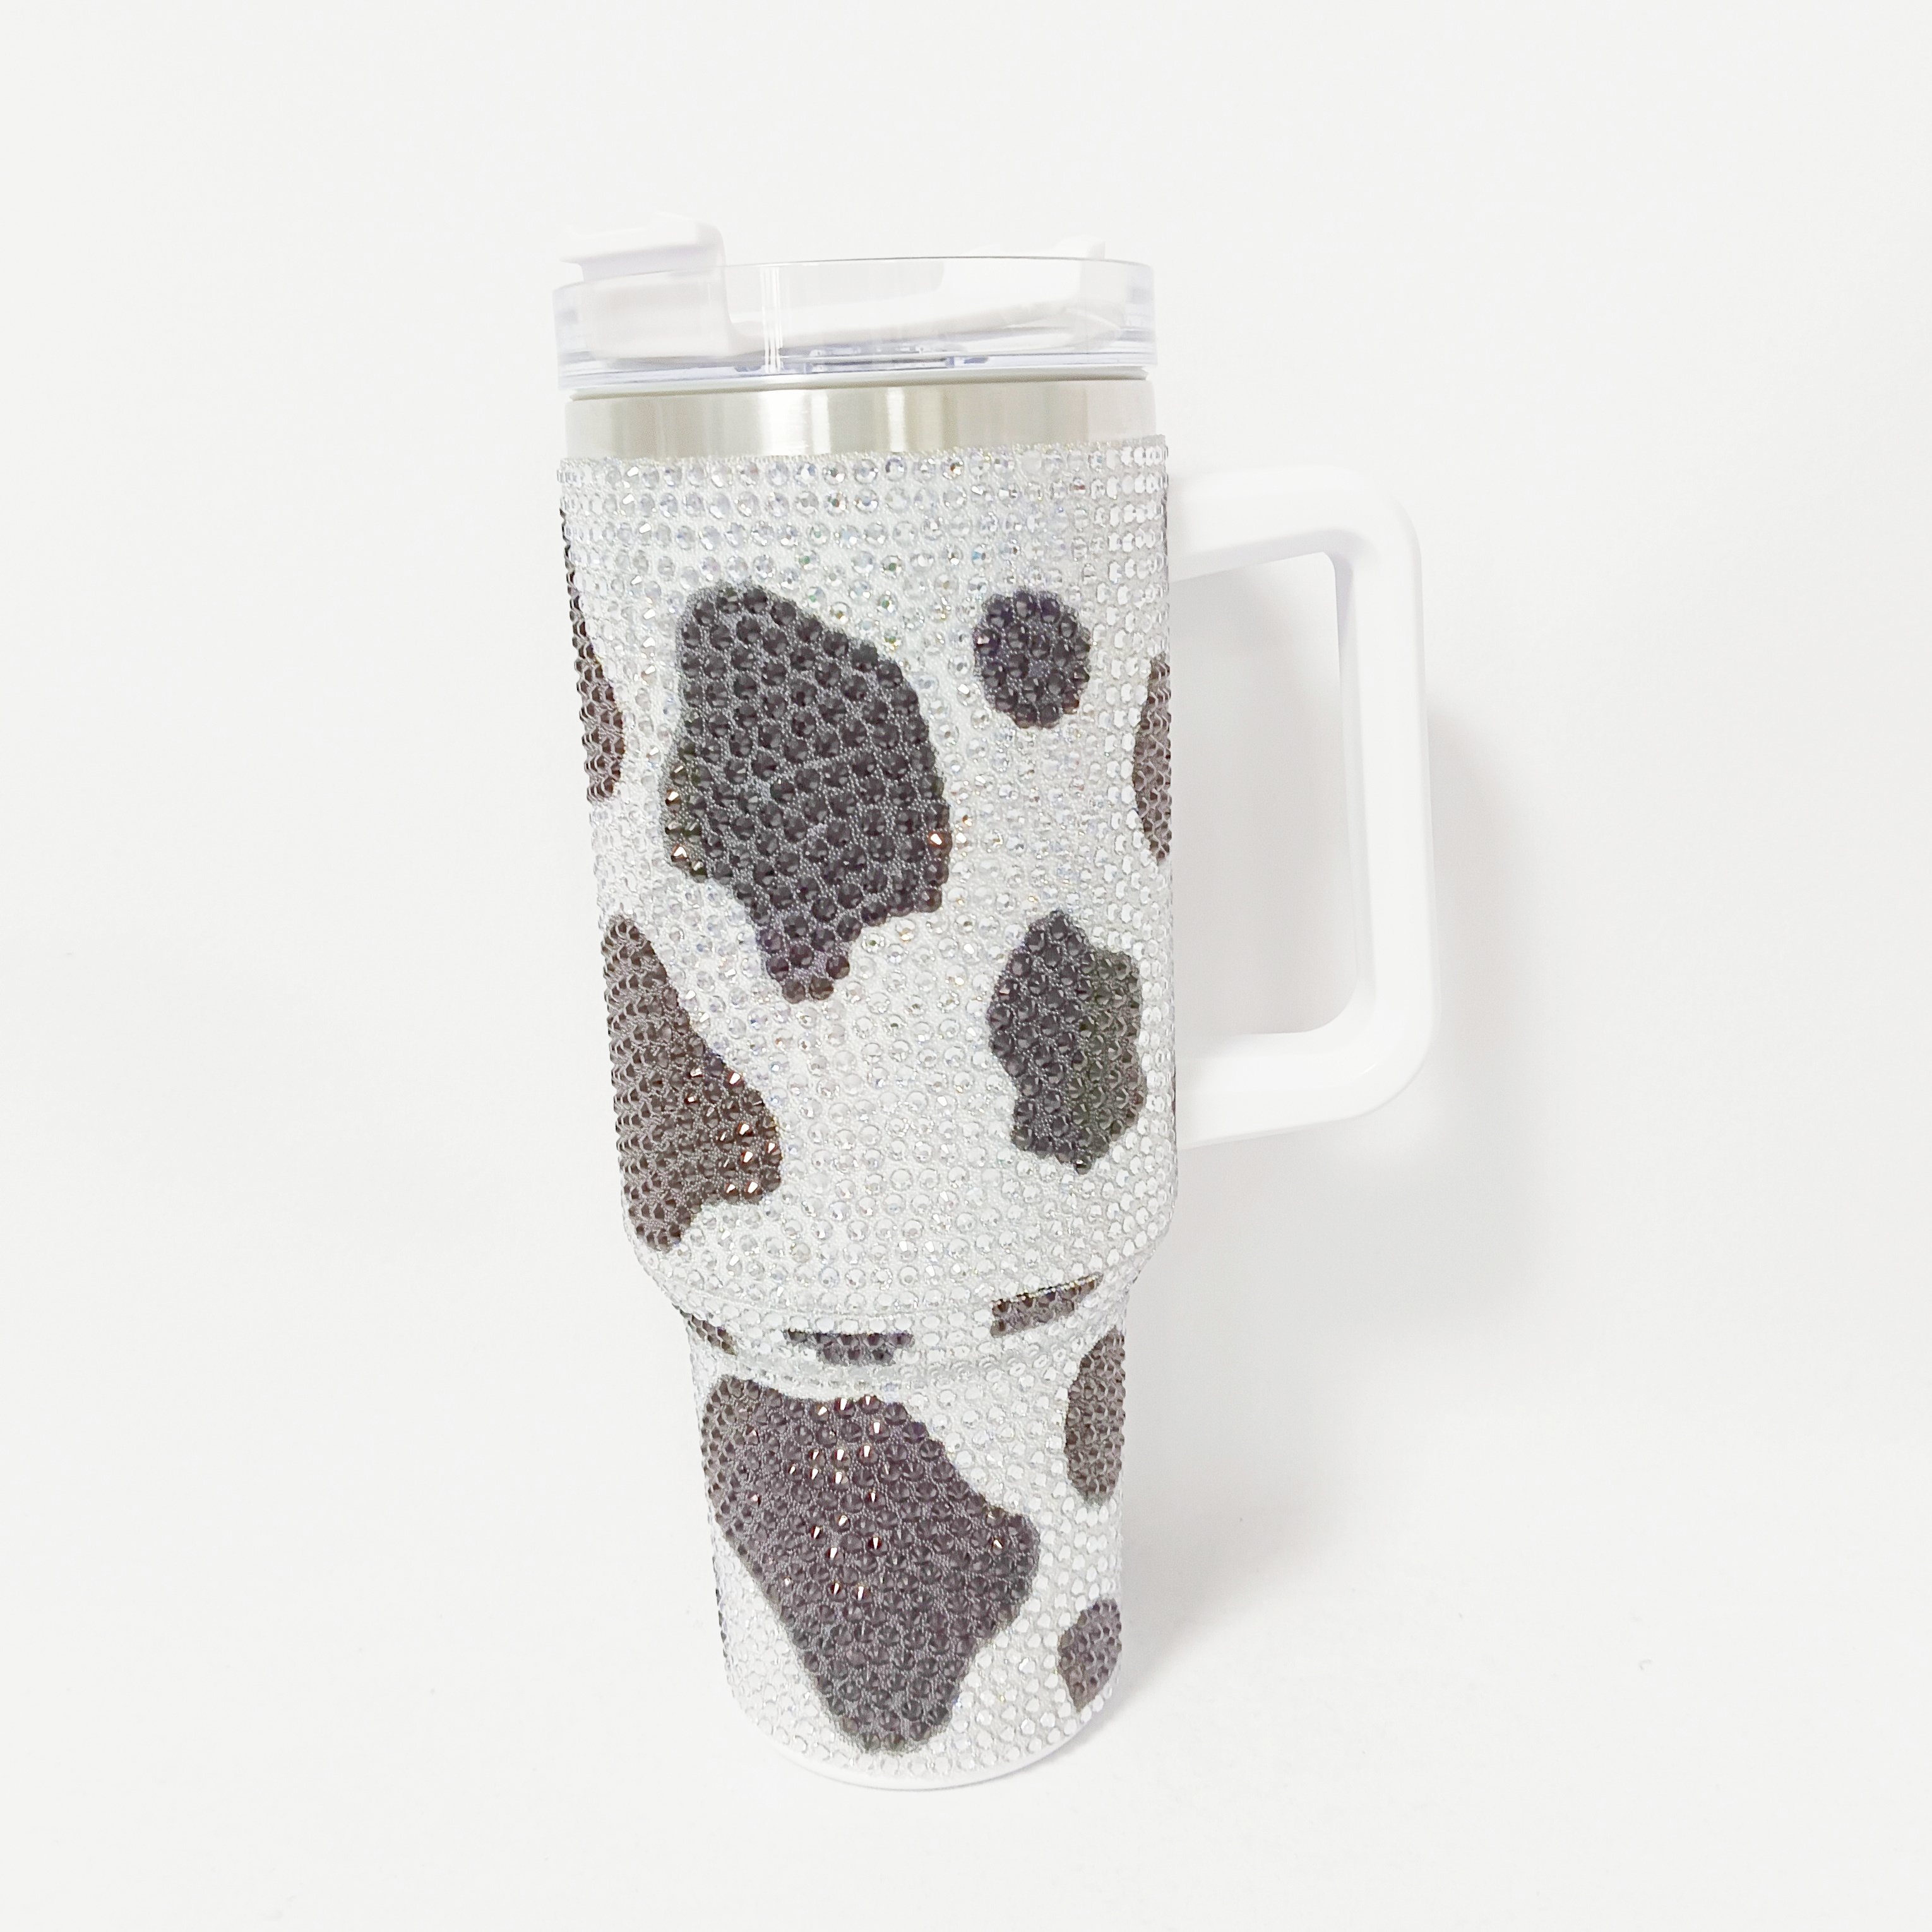 Cow Print - Black and White Acrylic Tumbler with Straw